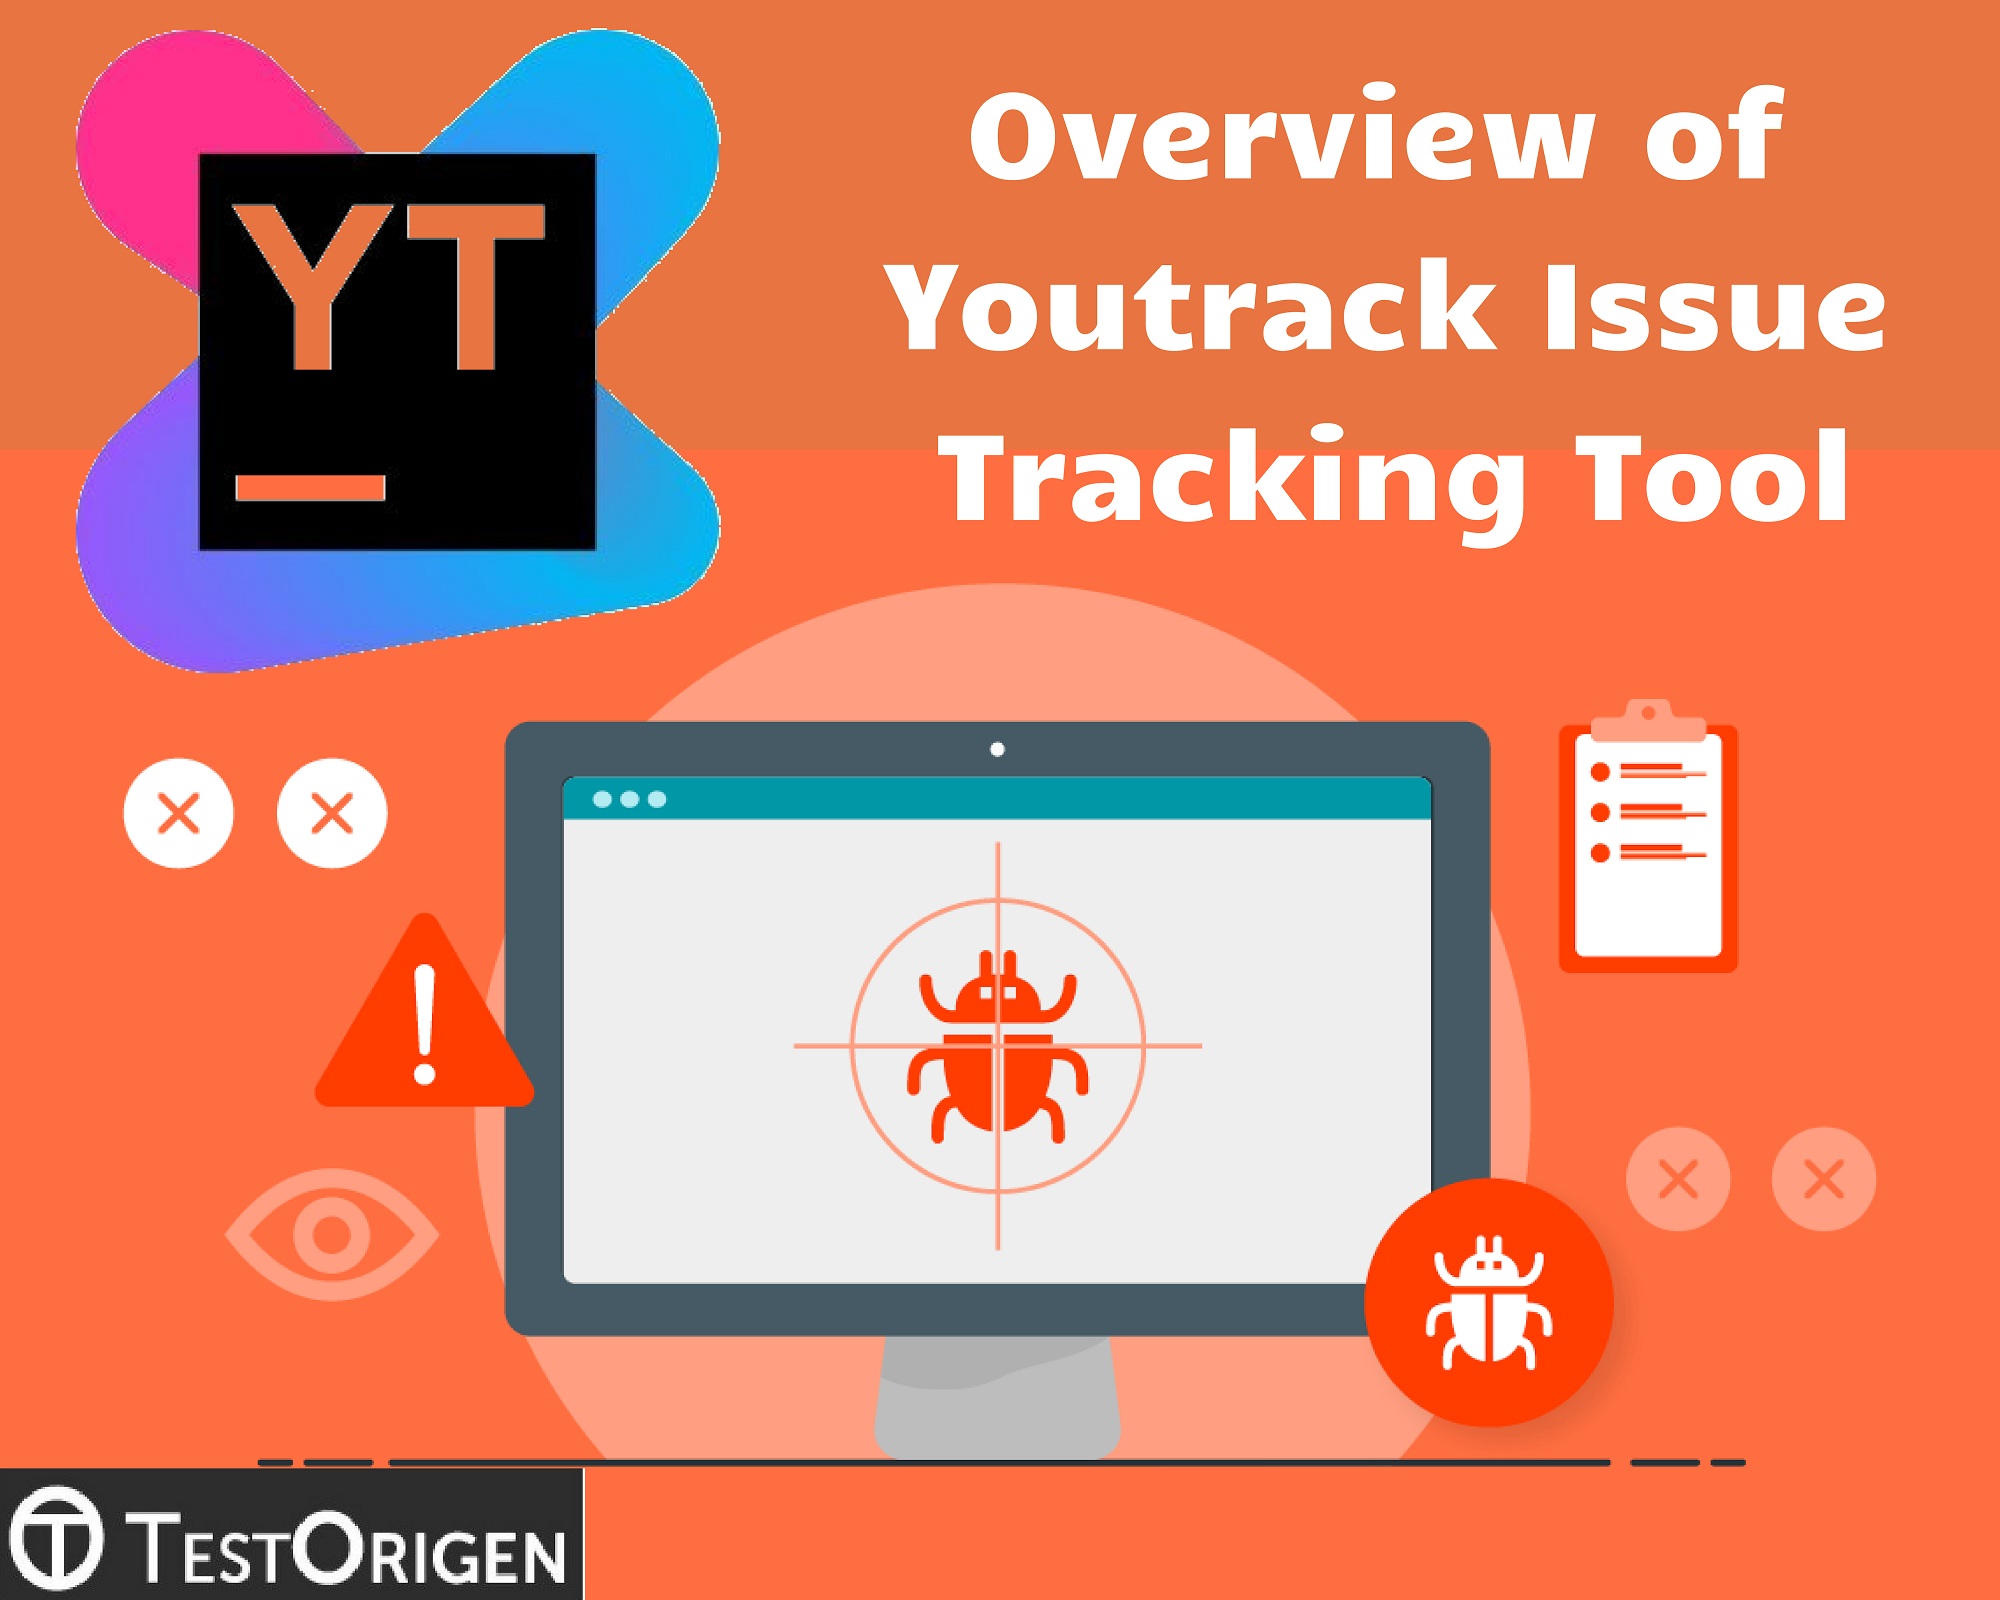 Overview of Youtrack Issue Tracking Tool